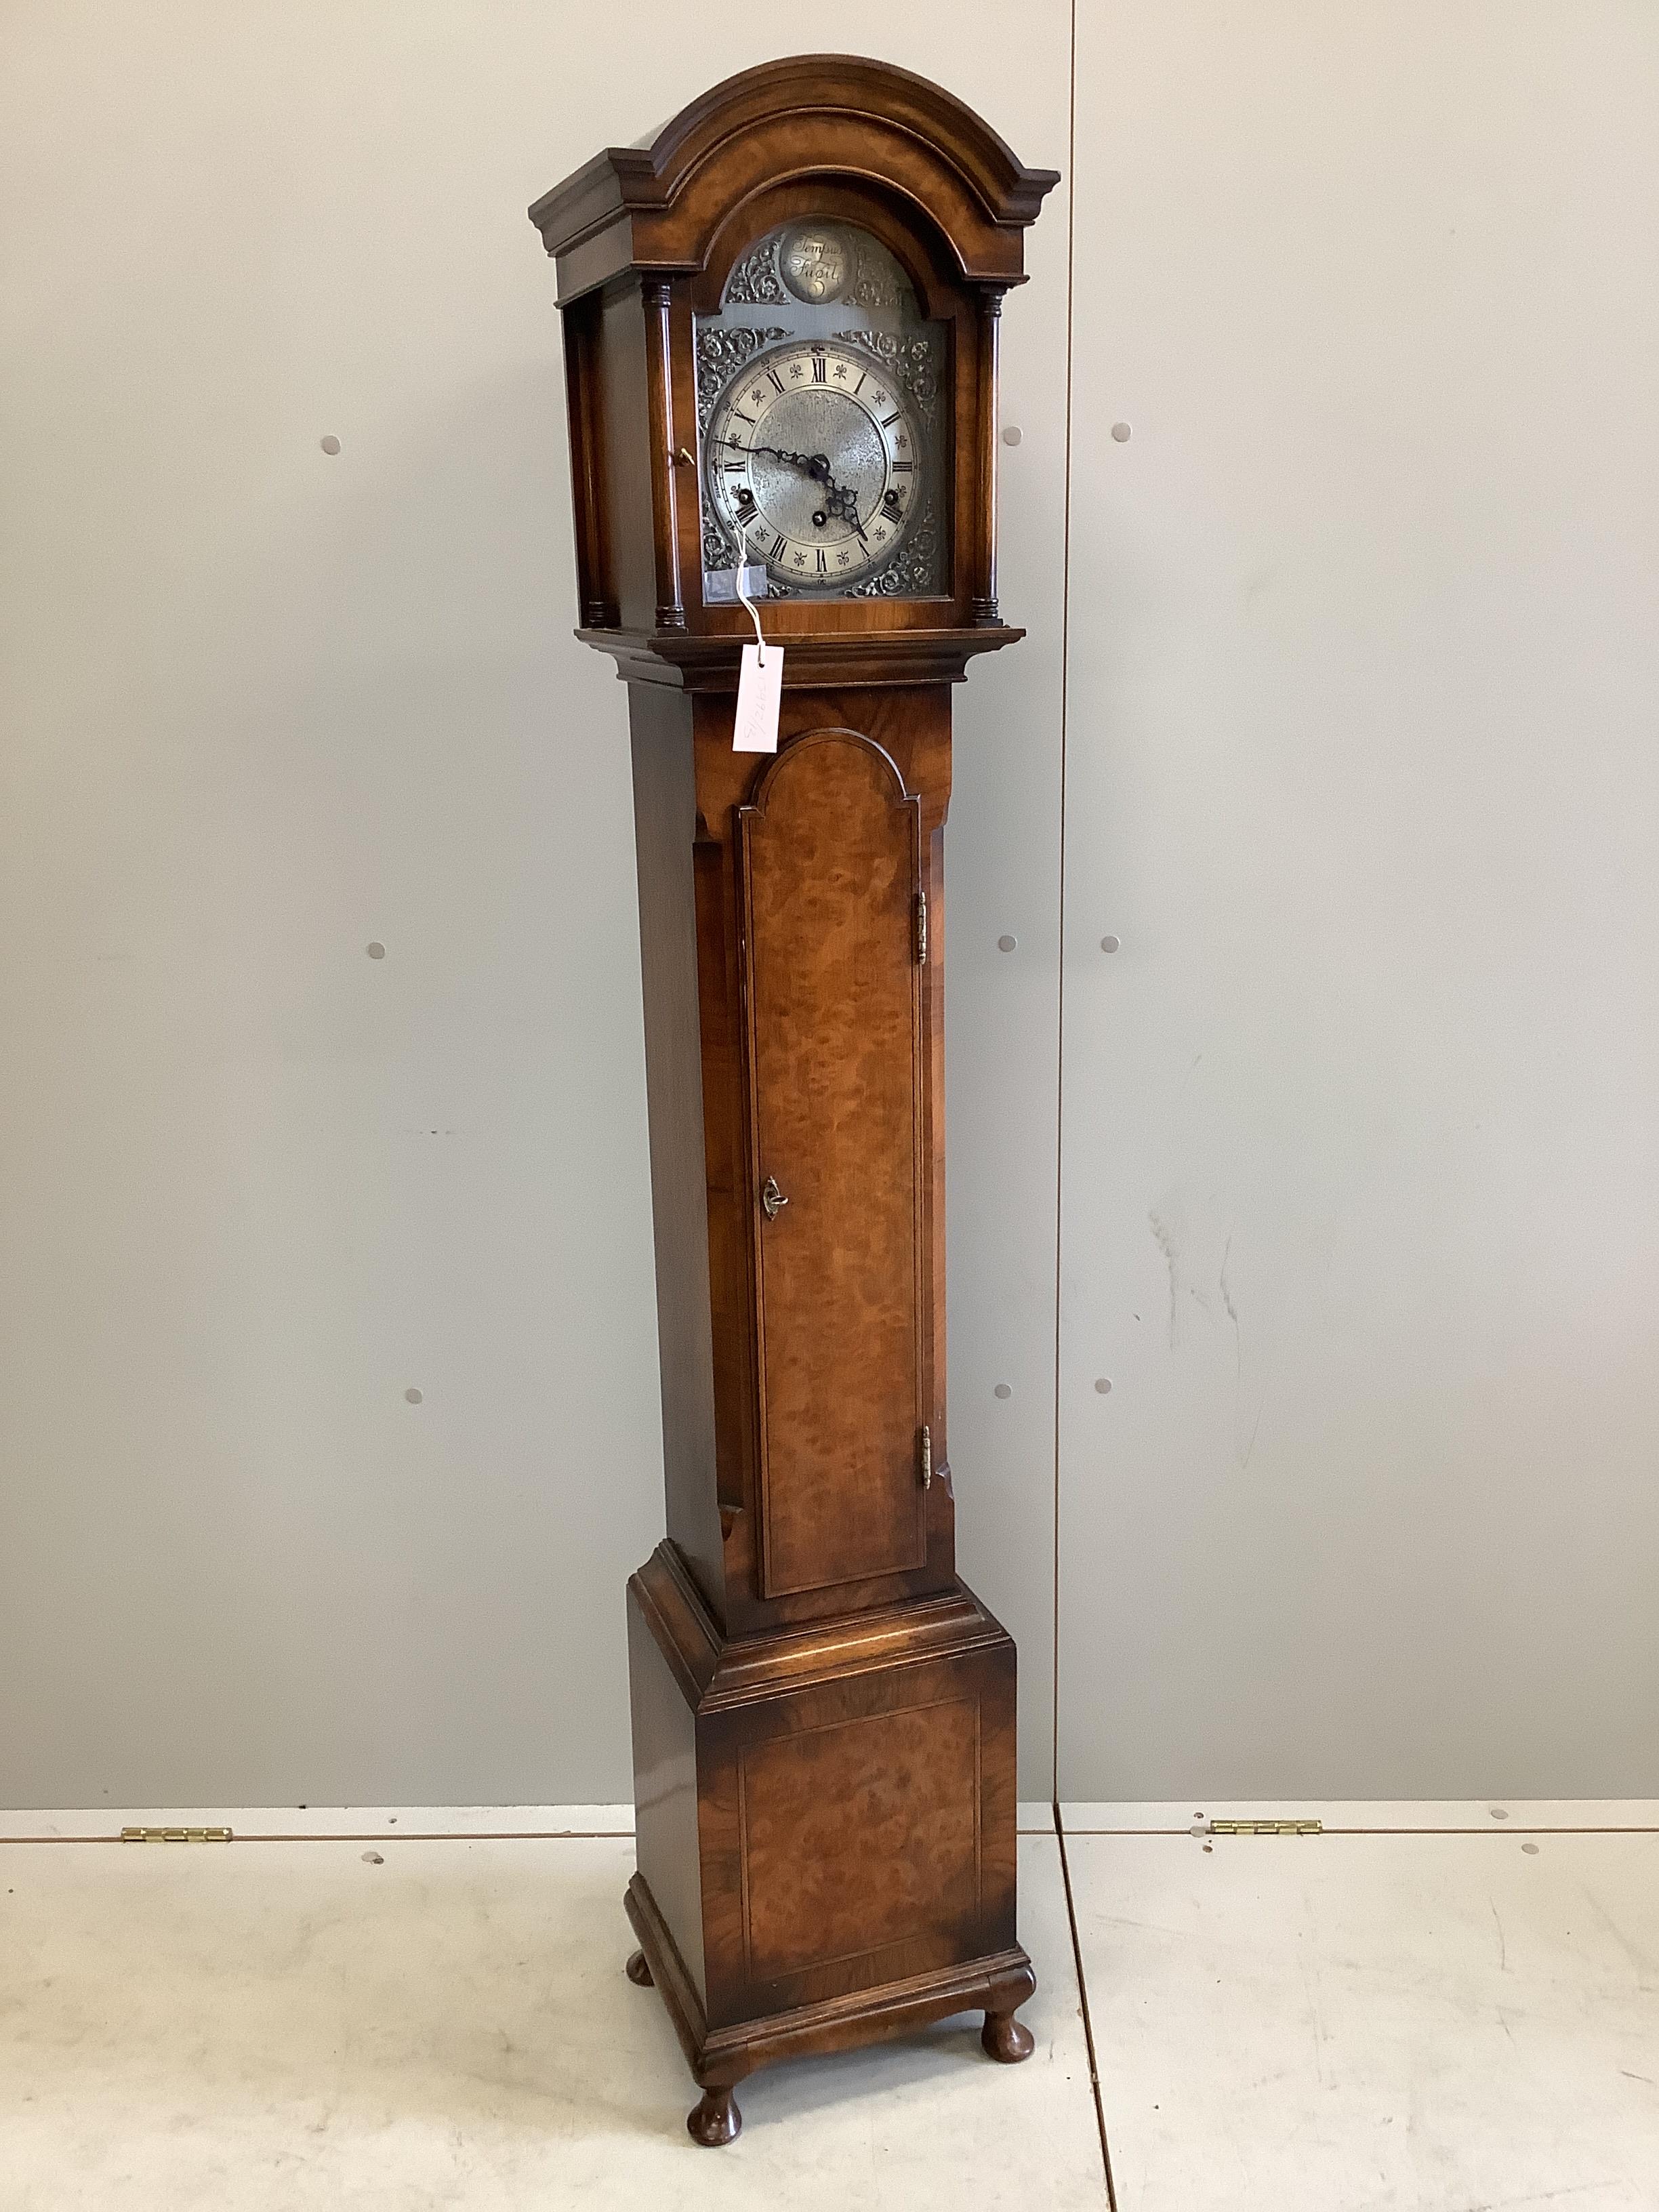 A reproduction 18th century style walnut grandmother clock with Whittington and Westminster chimes, height 153cm